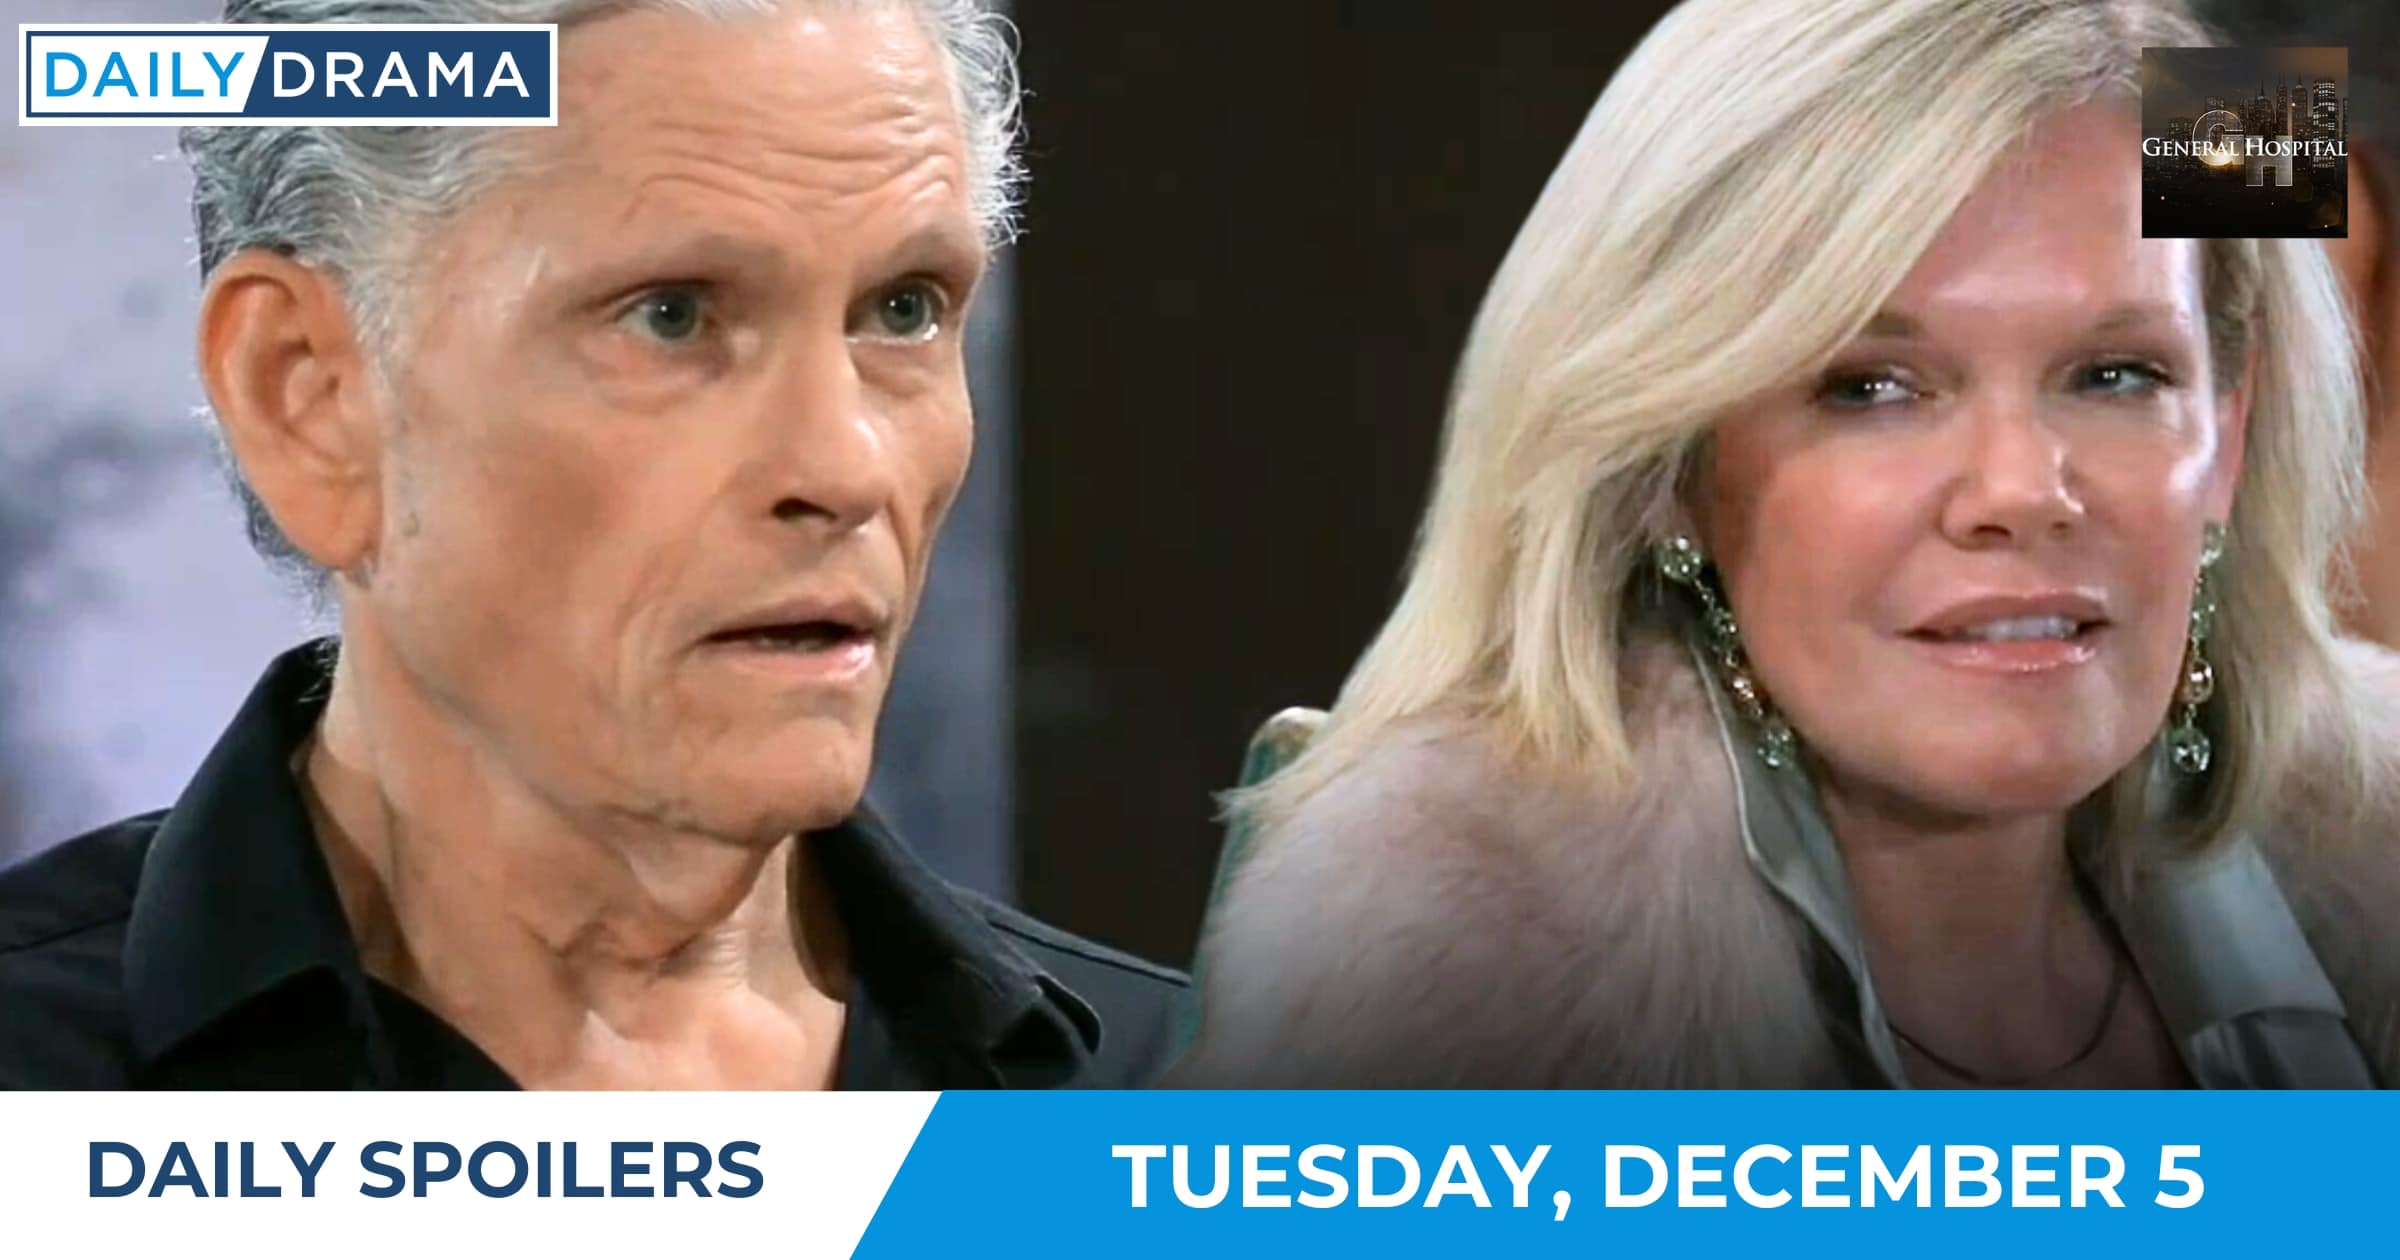 General Hospital Daily Spoilers - Dec 5 - Cyrus and Ava